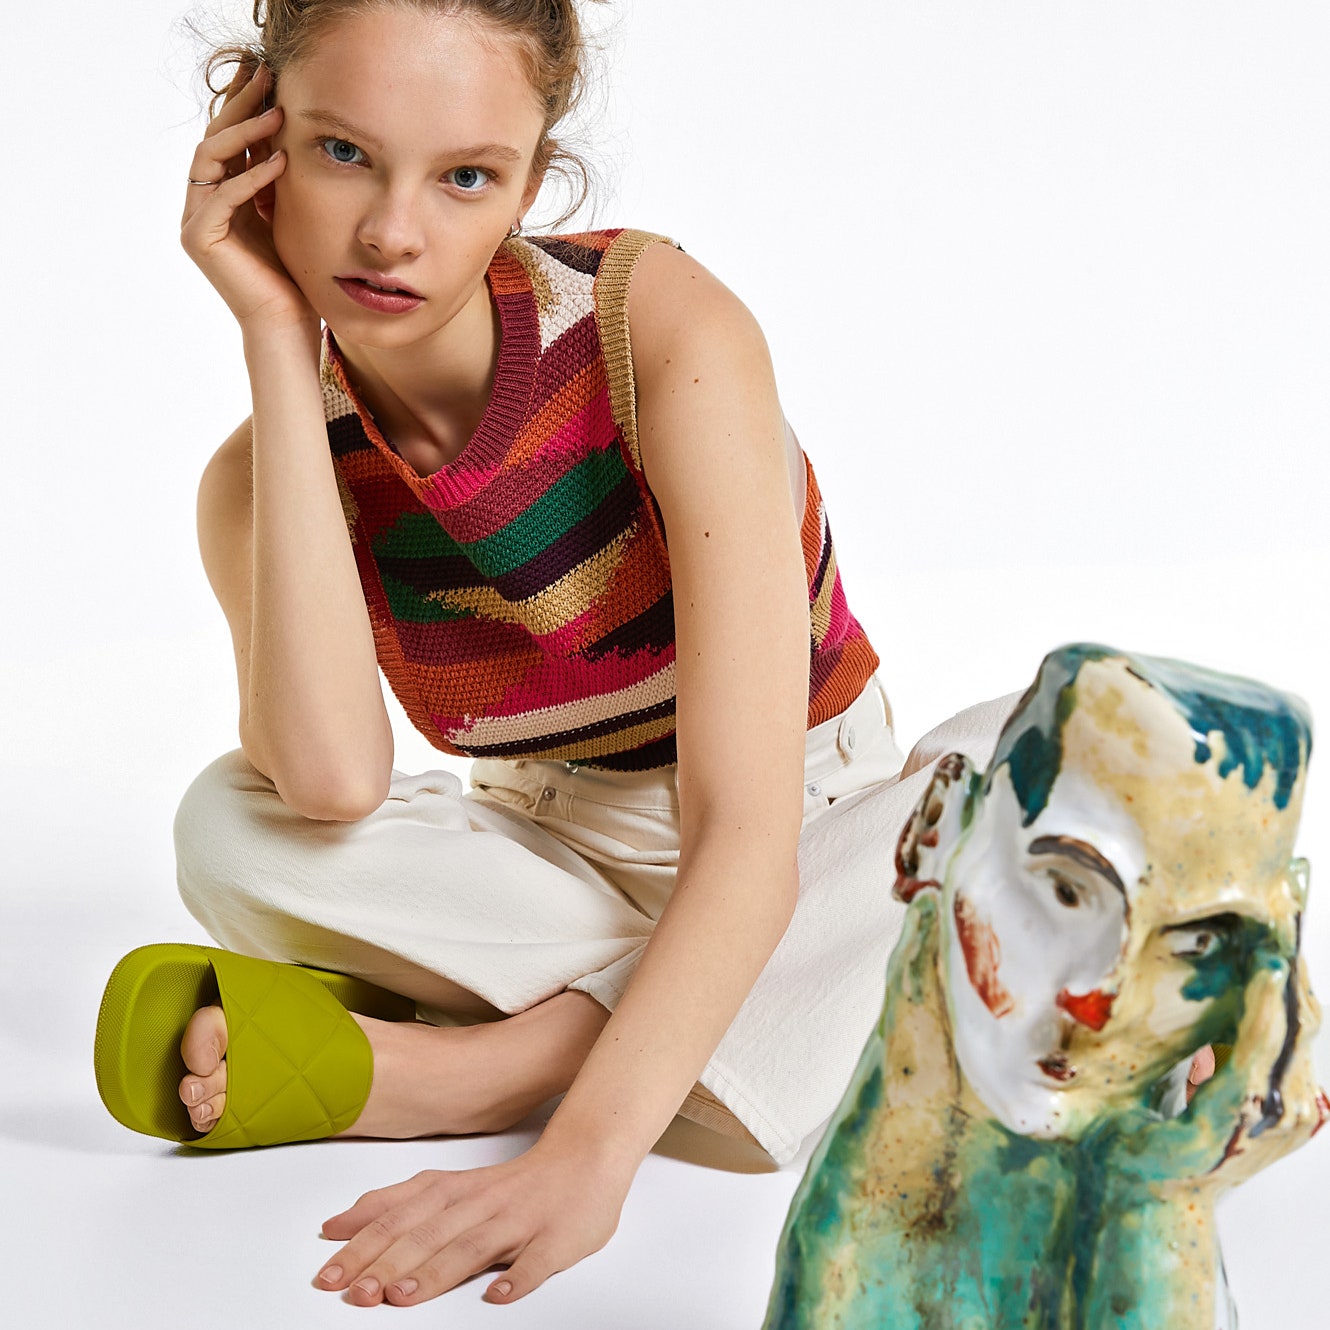 Model wearing striped top white jeans and green sliders sitting near sculpture of woman